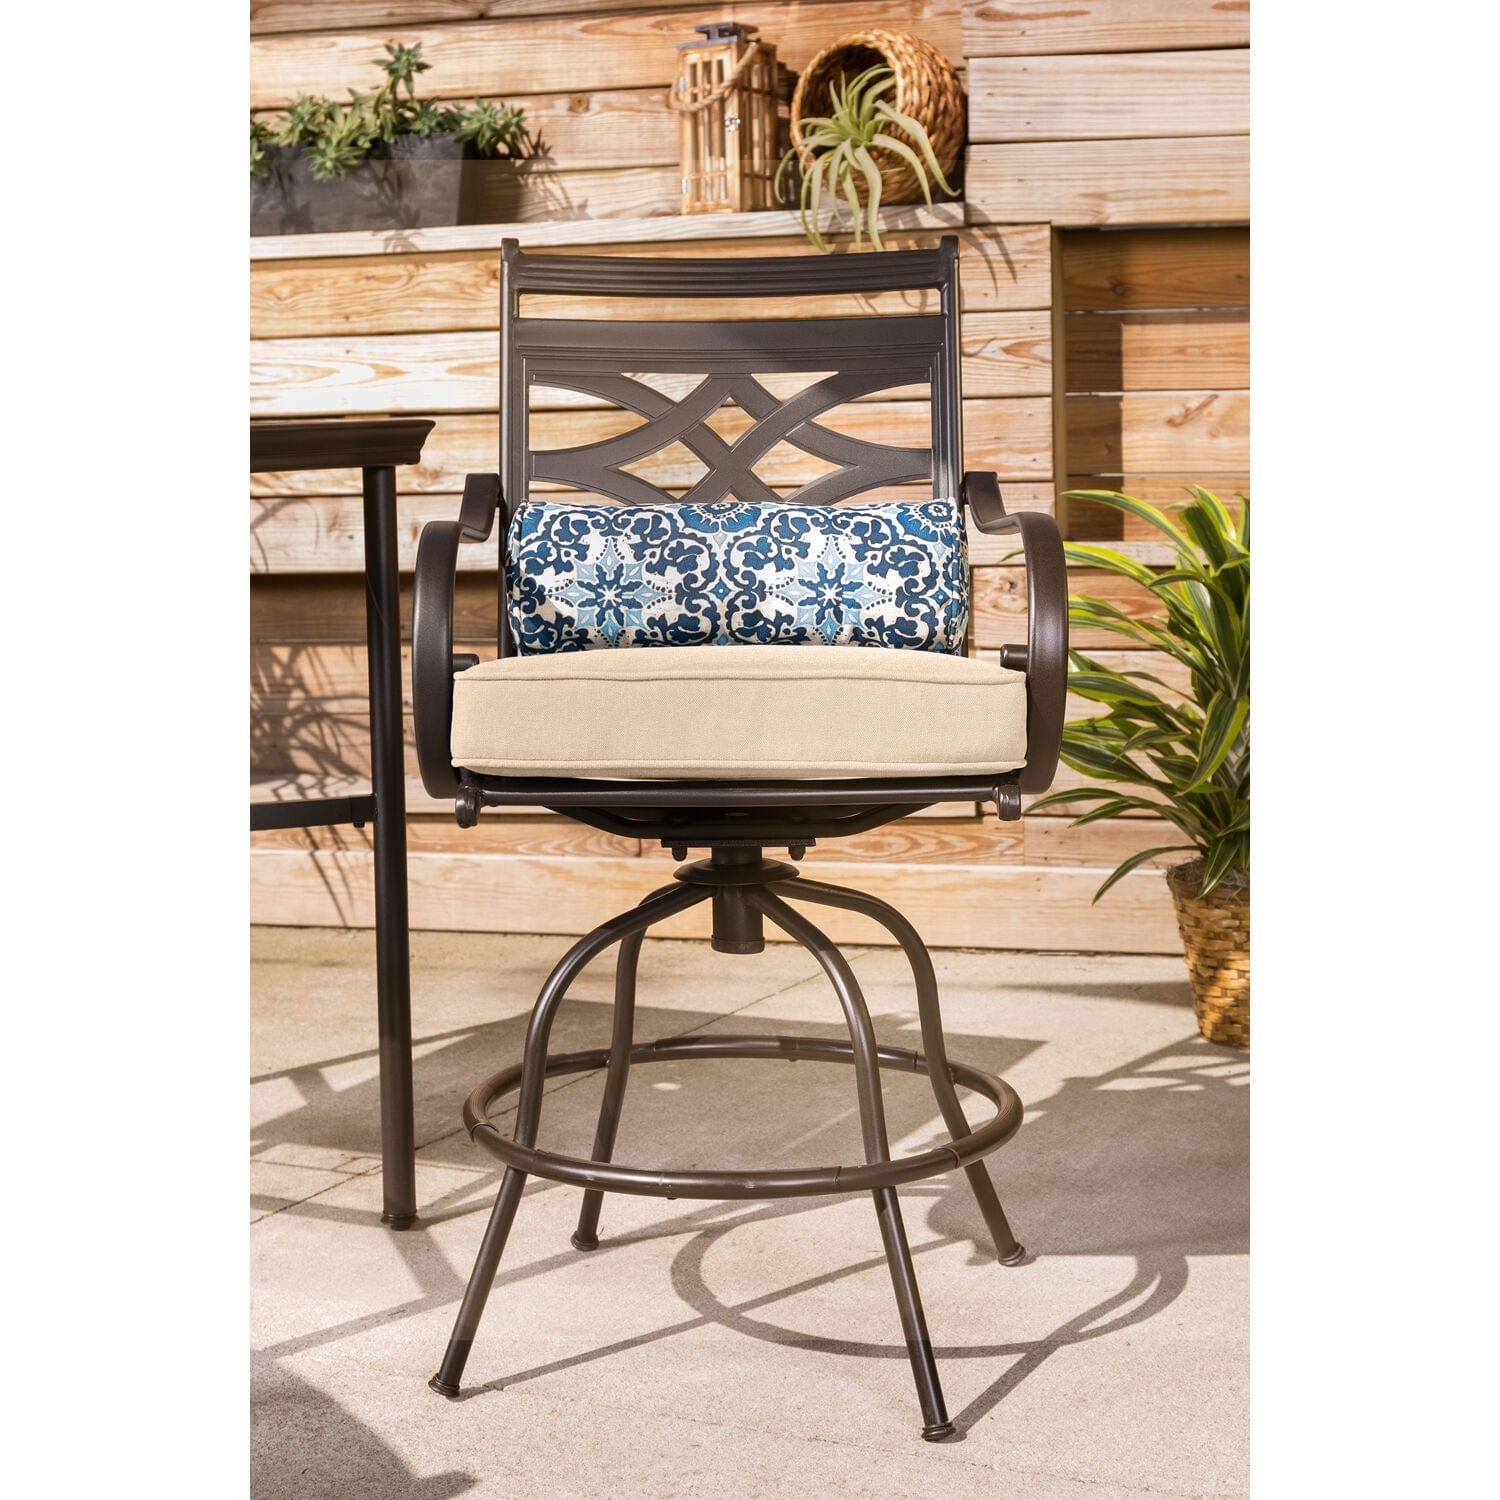 Hanover Outdoor Dining Set Hanover Montclair 5-Piece High-Dining Patio Set in Country Cork with 4 Swivel Chairs and a 33-In. Counter-Height Dining Table | MCLRDN5PCBR-TAN